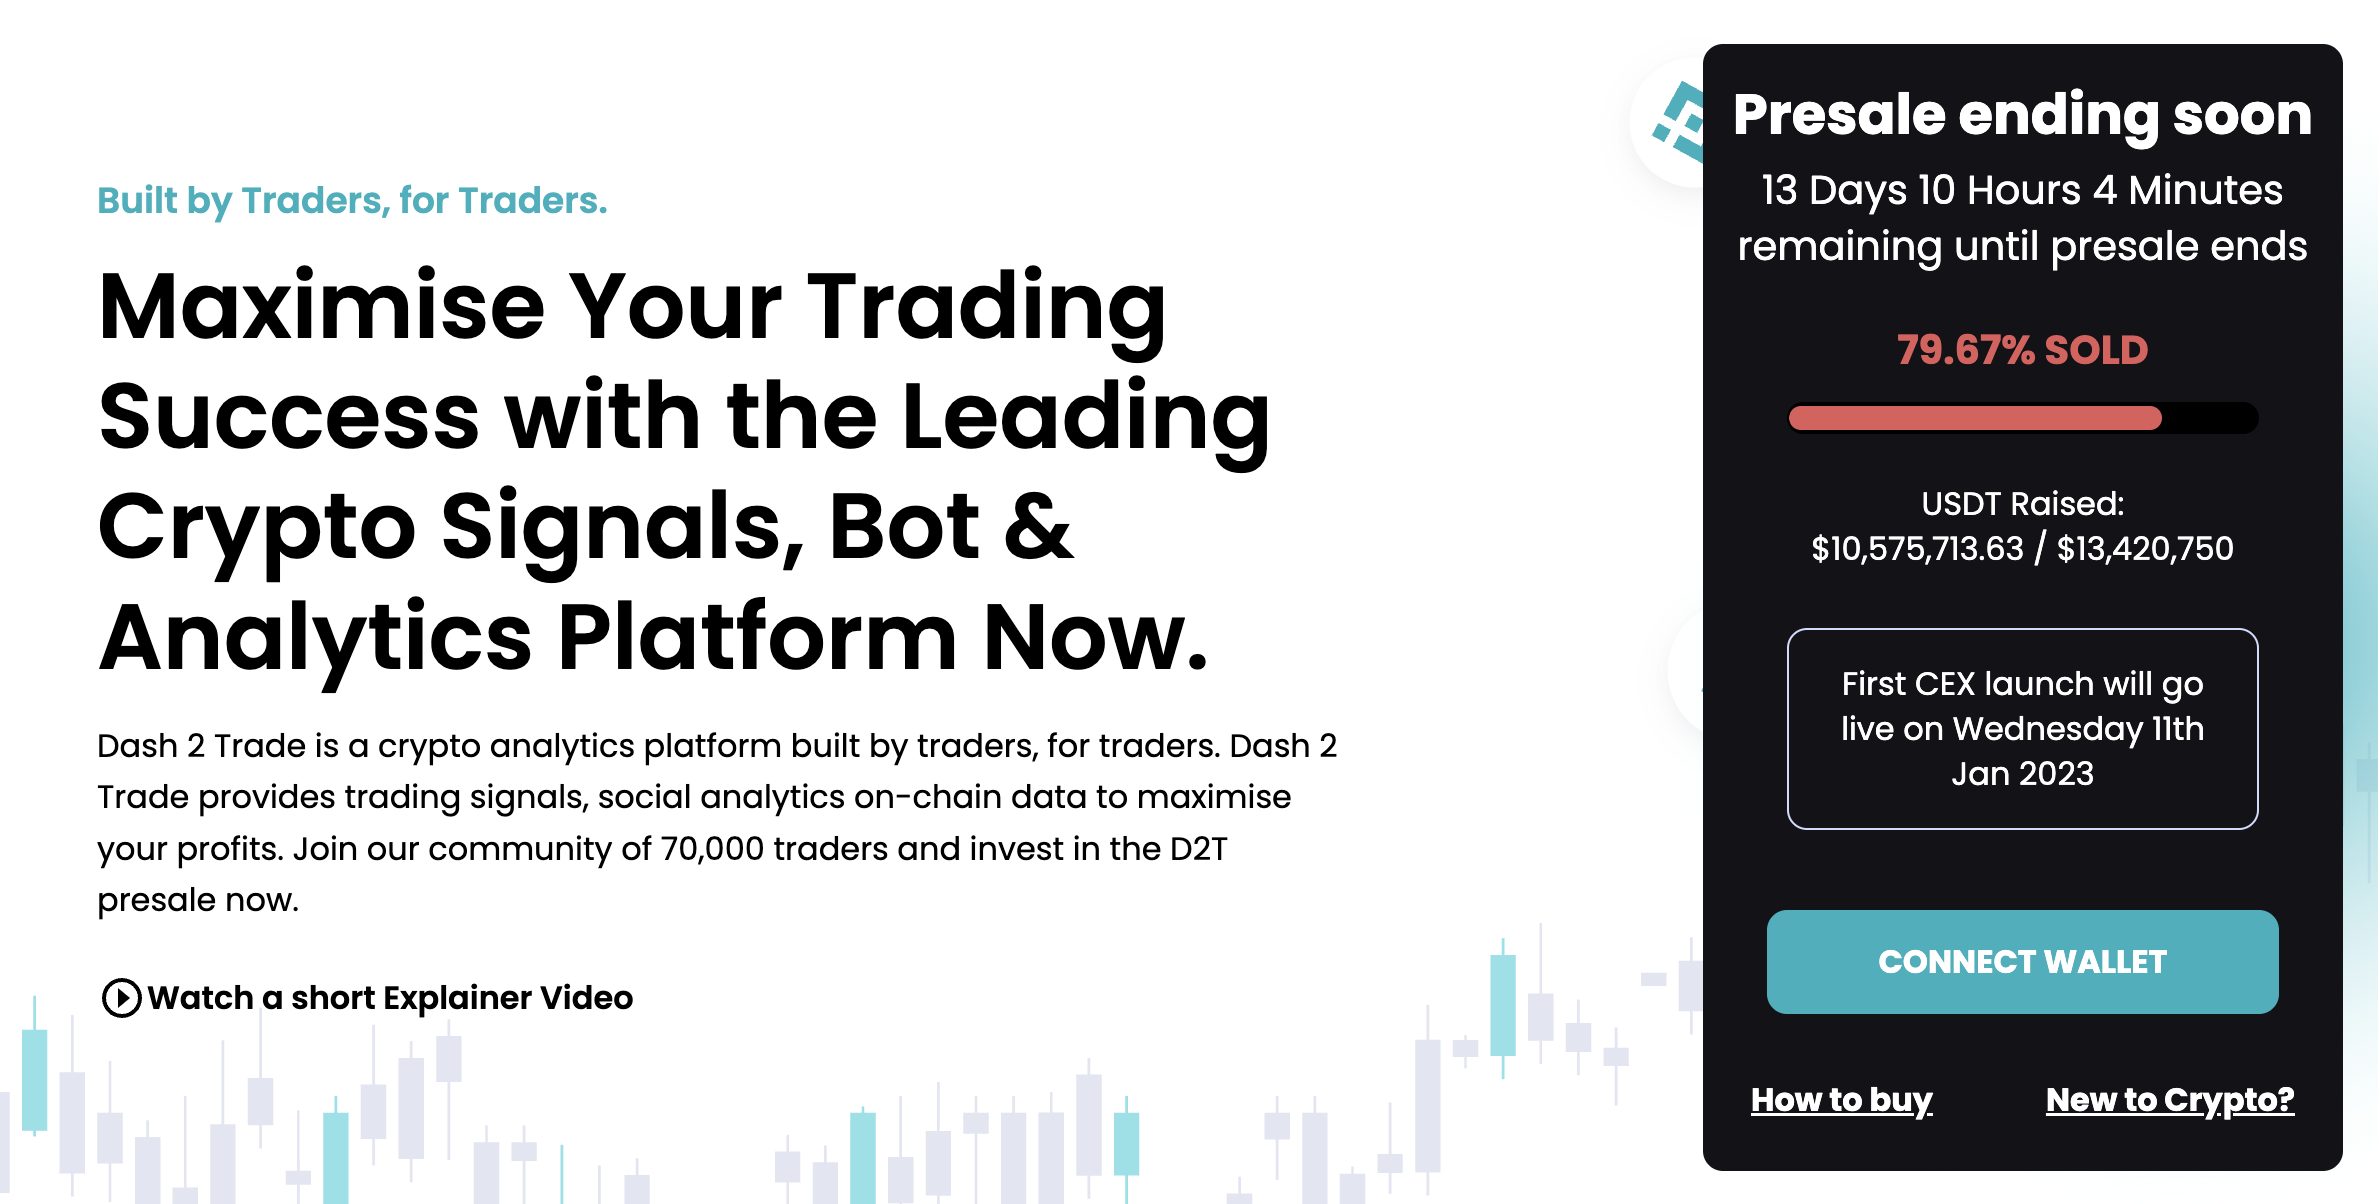 Dash 2 Trade Presale - Less than two weeks remain